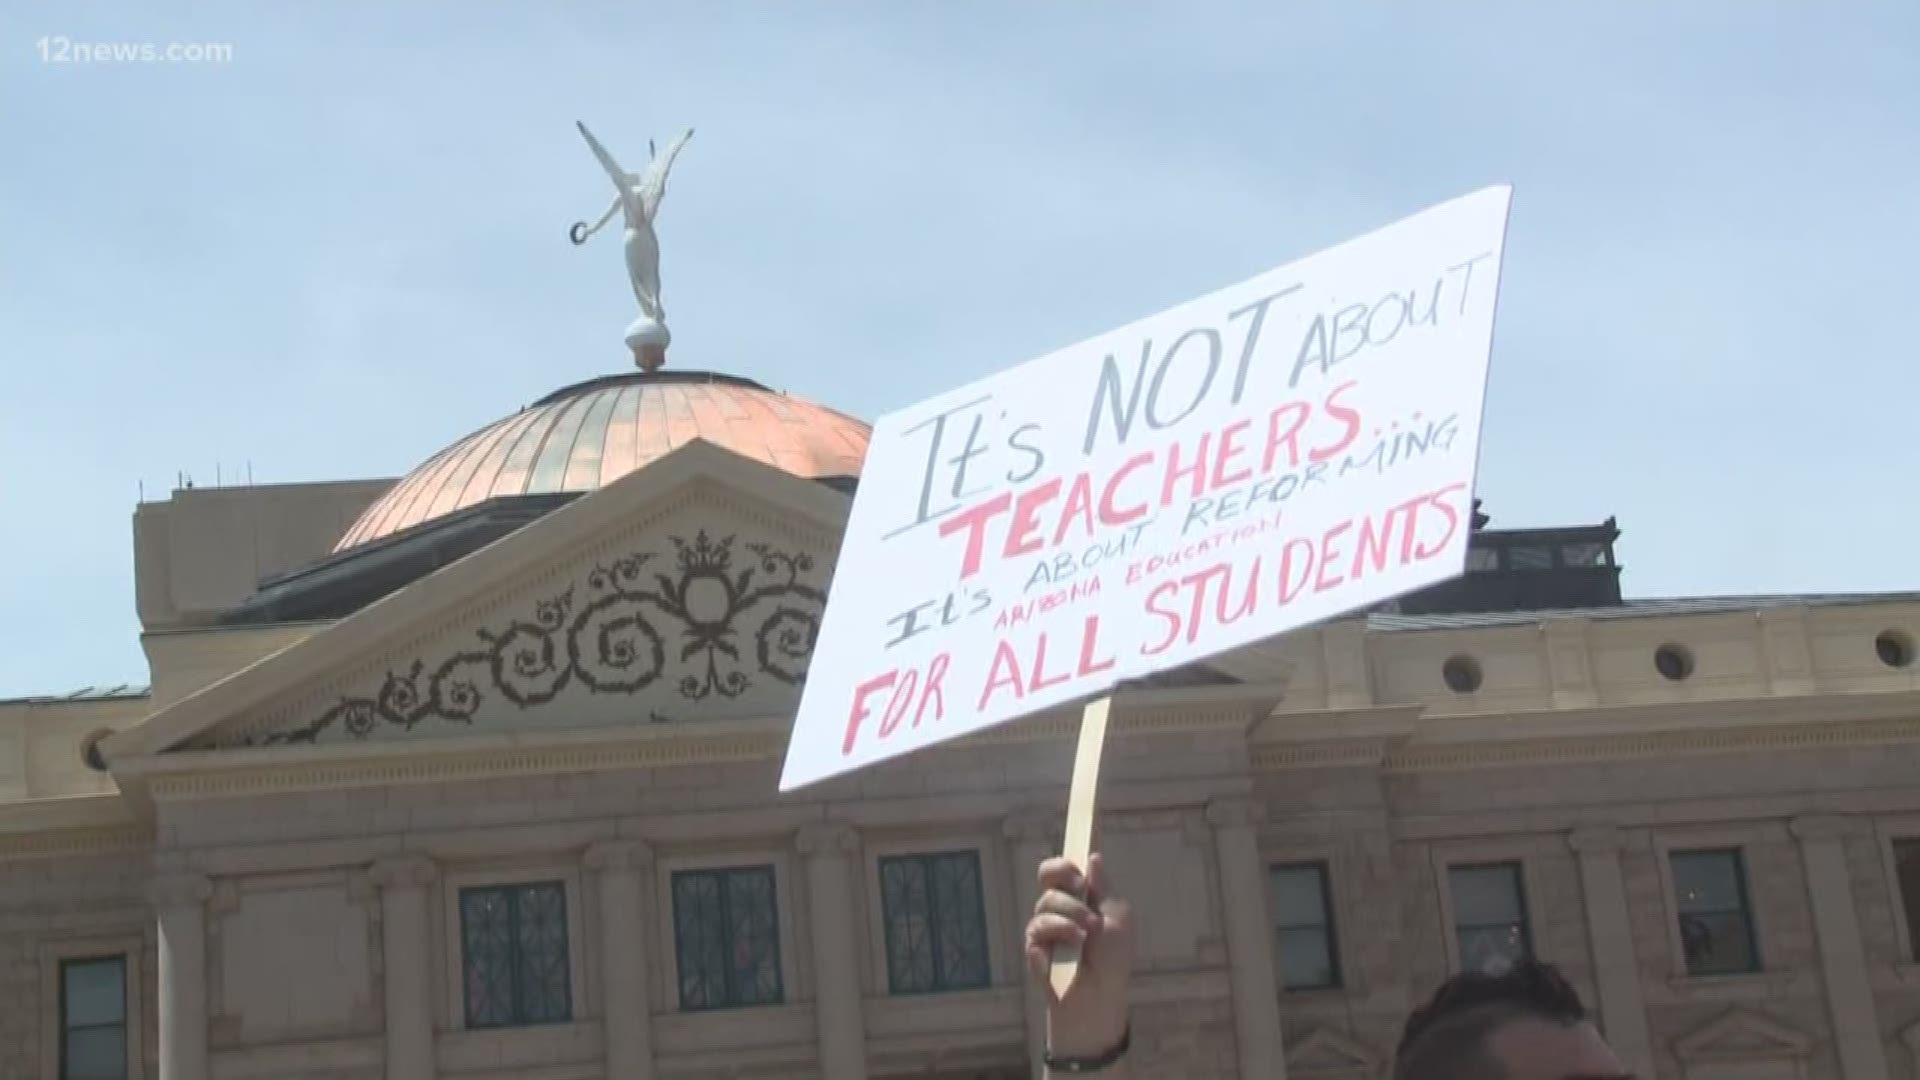 New details on the Arizona state budget outline the deal Arizona Gov. Doug Ducey says could bring teachers back to classrooms.